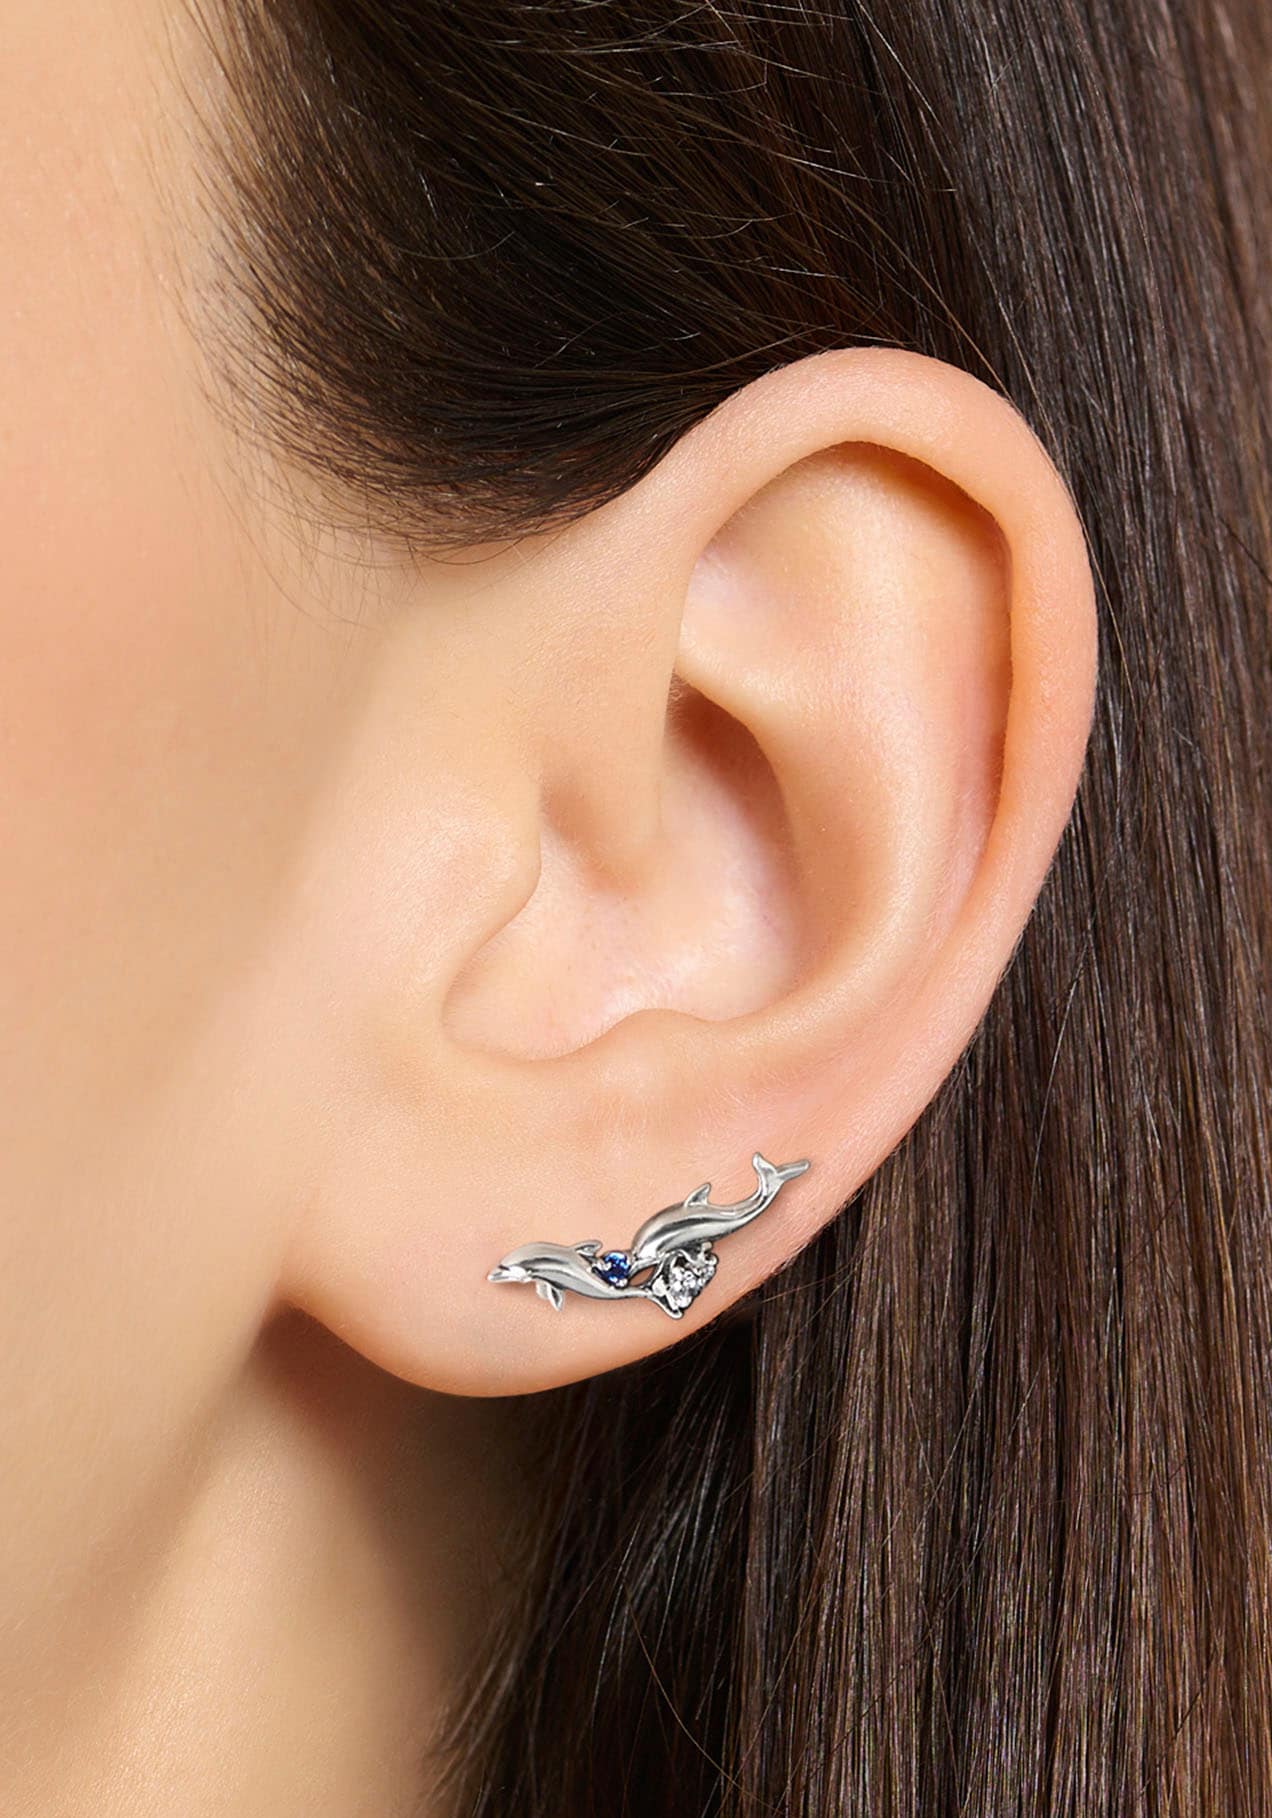 THOMAS SABO Paar Ohrstecker »Ear climber Delfin mit Steinen, H2232-644-1«, mit Spinell (synth.), Zirkonia (synth.)